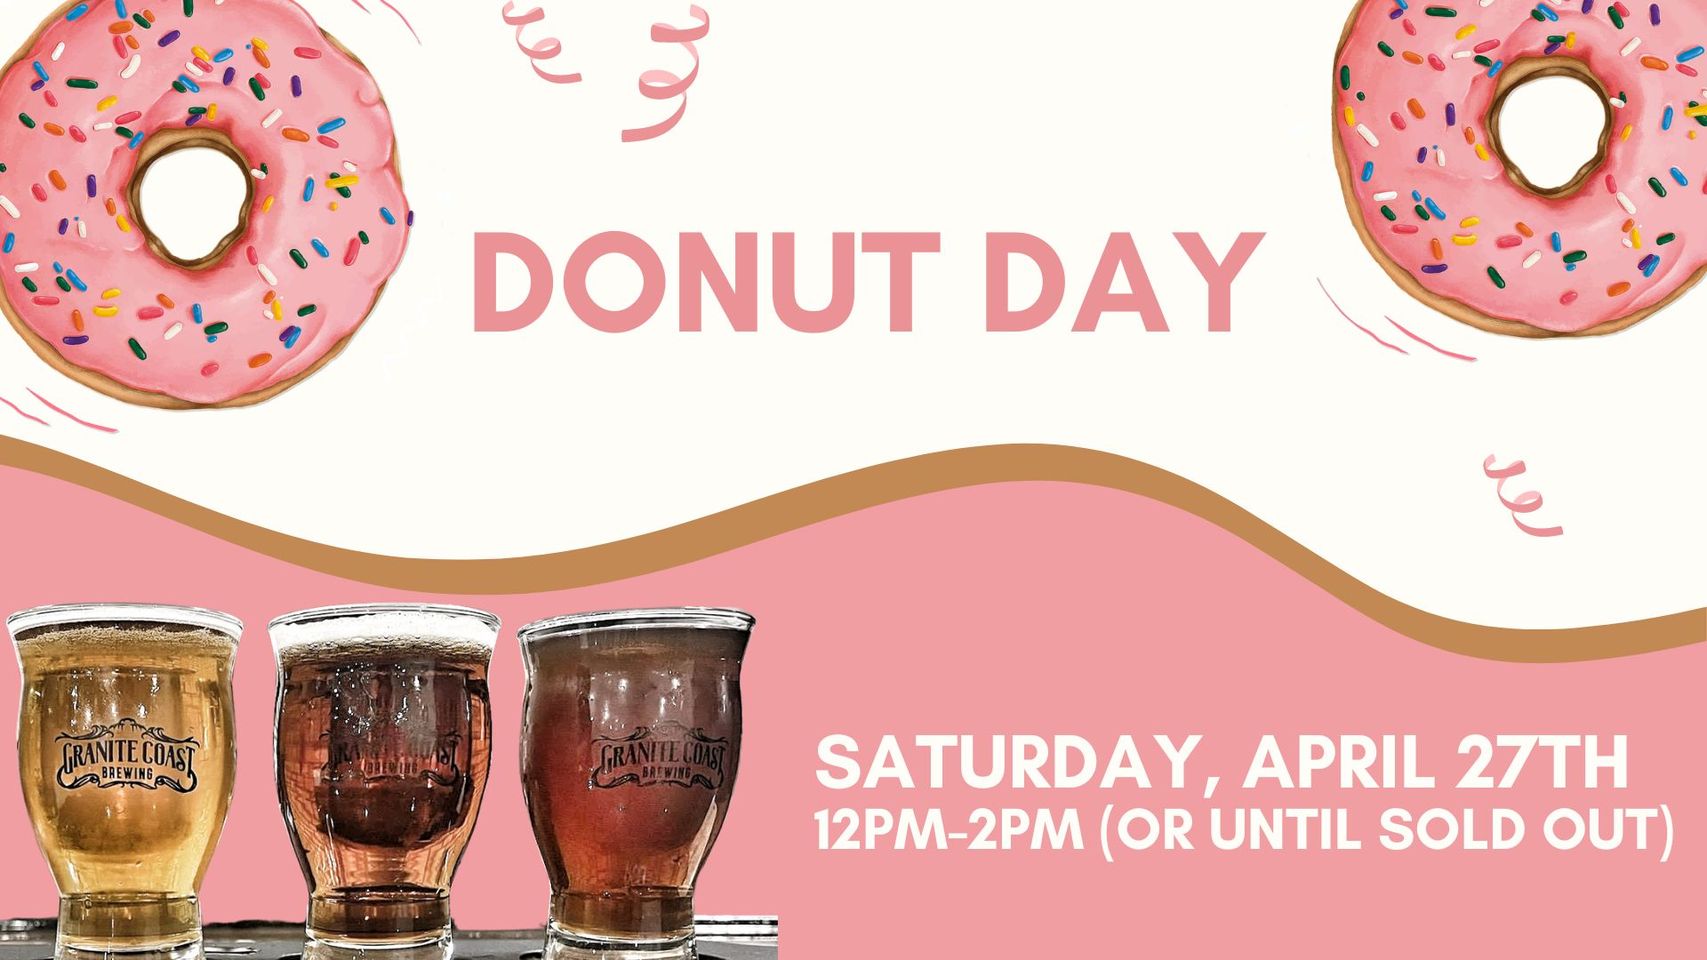 Check out our sweet and savory Donut Day! Feast your eyes on our vibrant promo image showcasing two tempting pink donuts and four chilled beer glasses. Join us for the fun on April 27th, from 12pm-2pm. Save the date now!